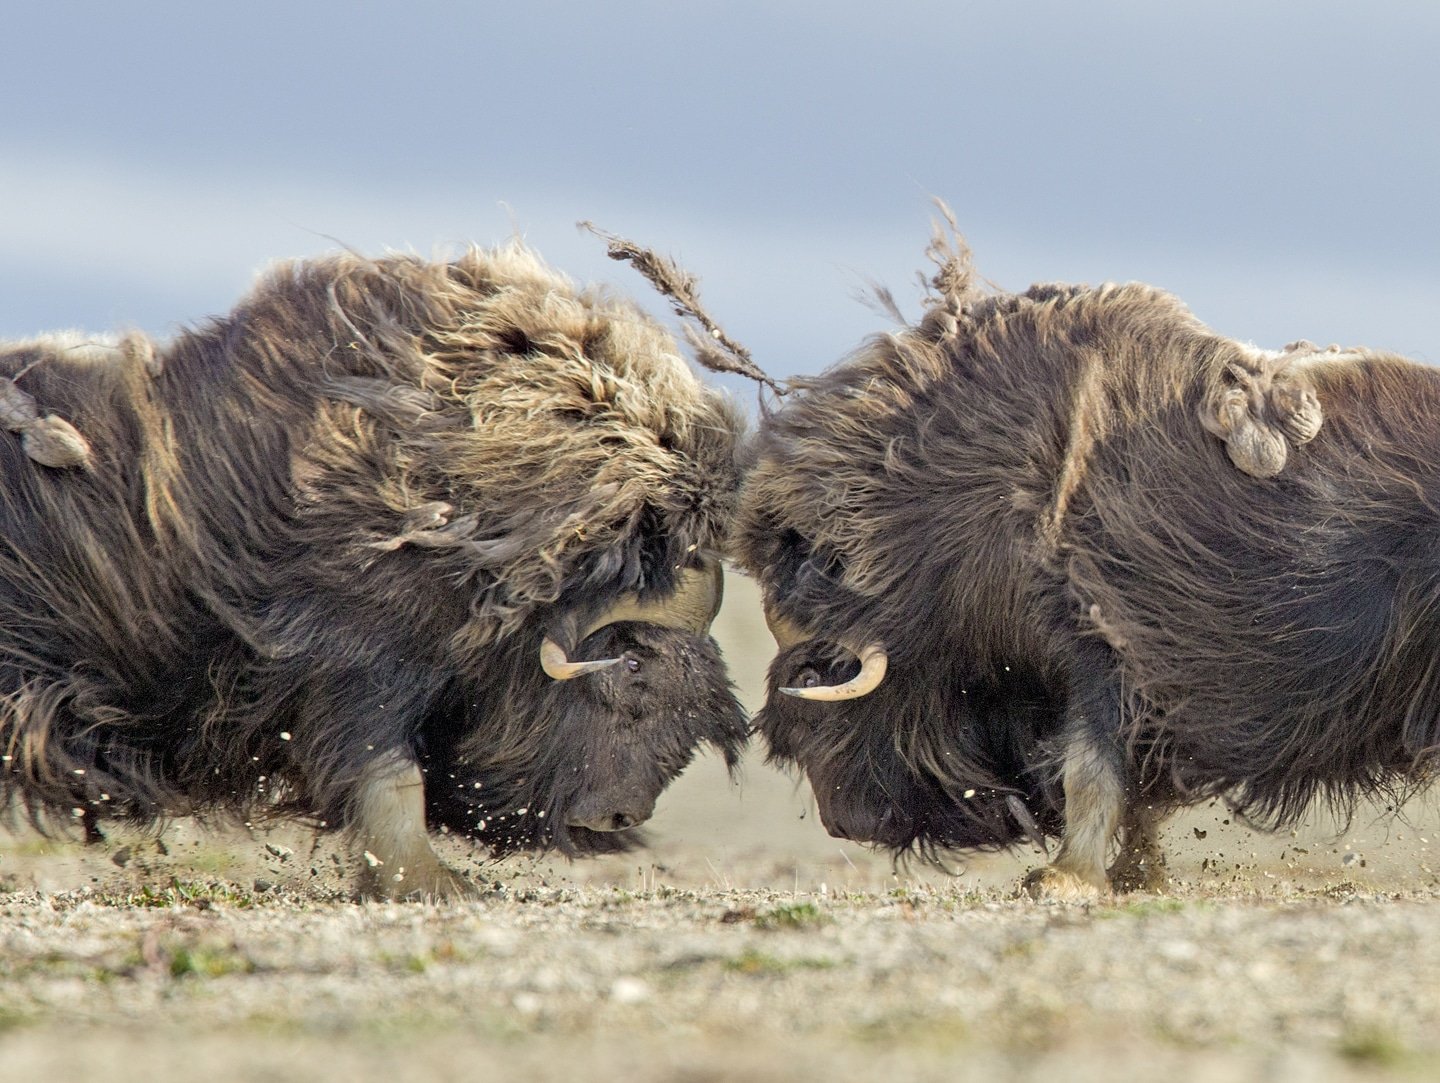 Bull muskoxen face off and fight for dominance on the barren Arctic tundra near Arctic Watch Wilderness Lodge. Photo Nansen Weber